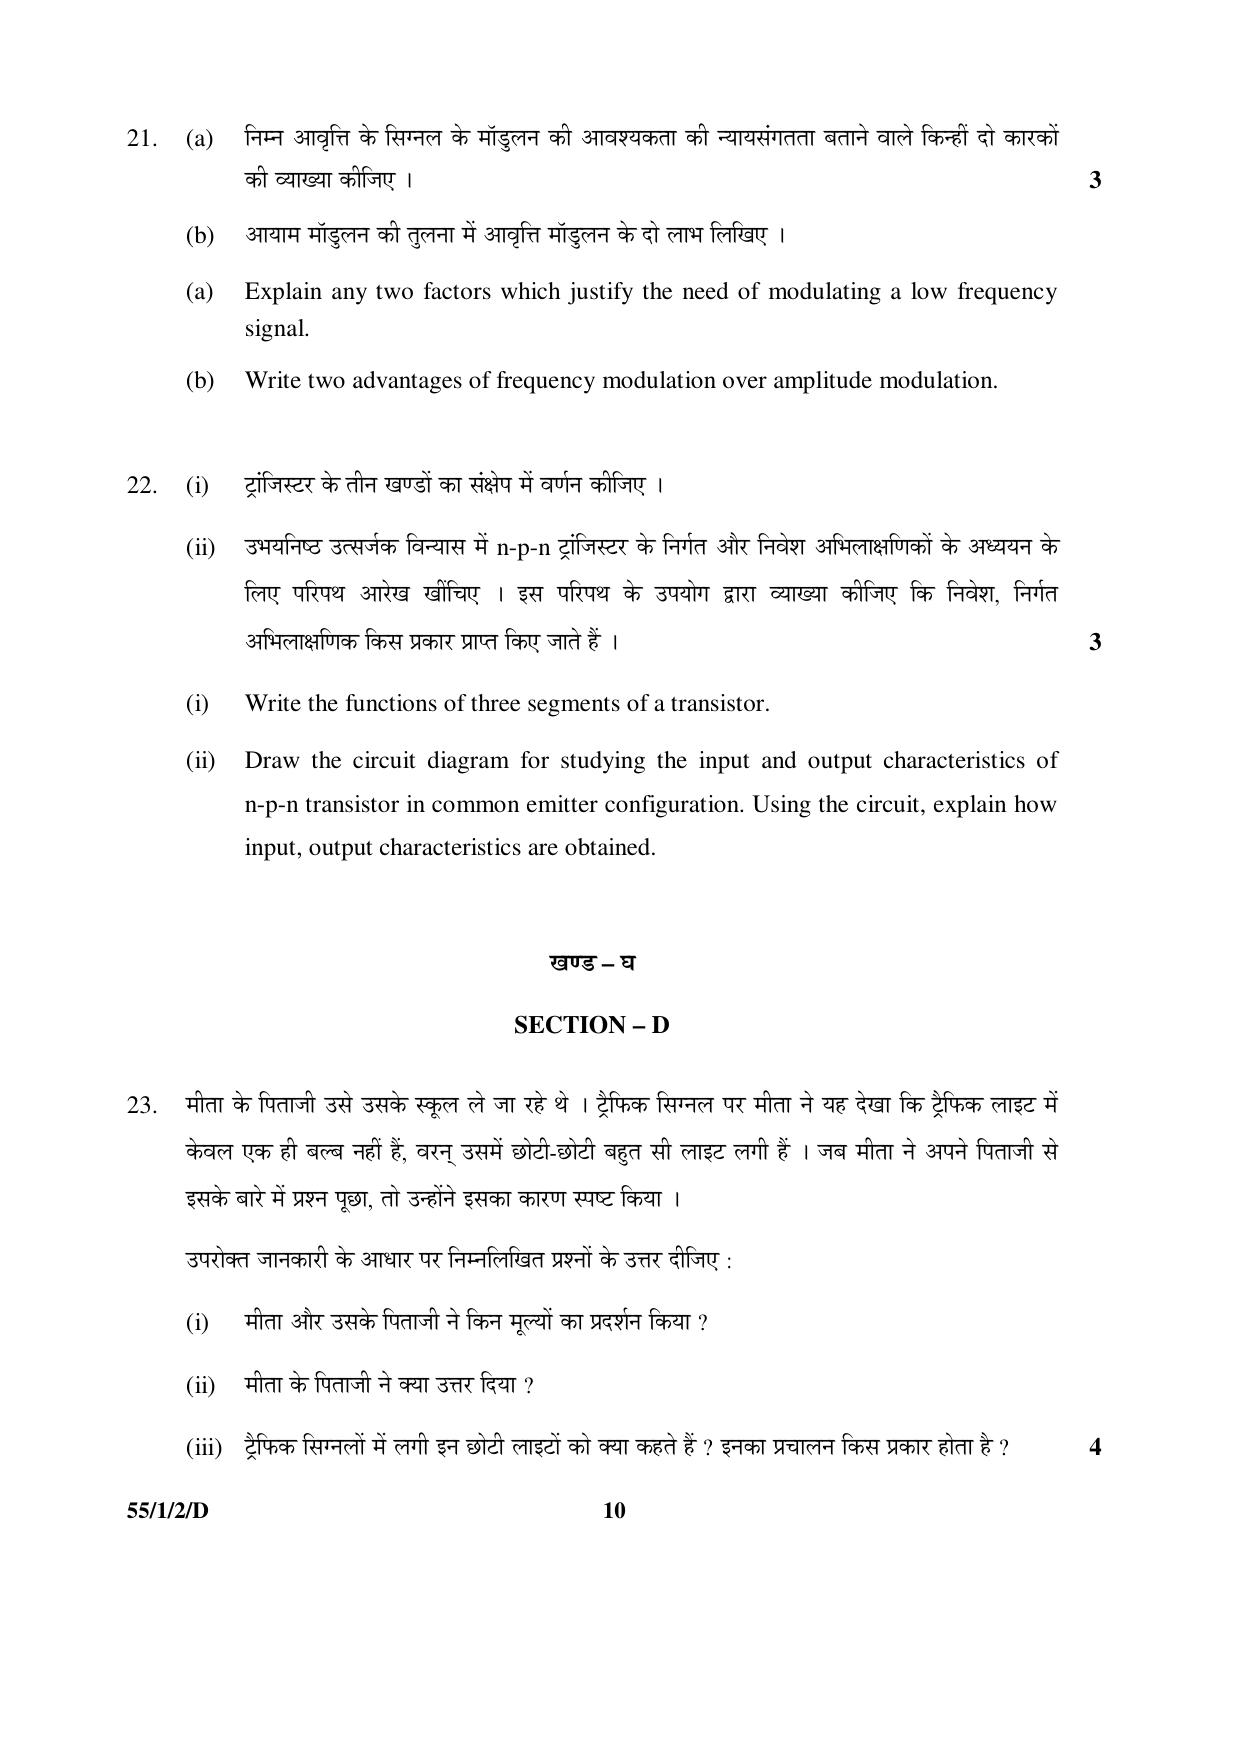 CBSE Class 12 55-1-2-D PHYSICS 2016 Question Paper - Page 10